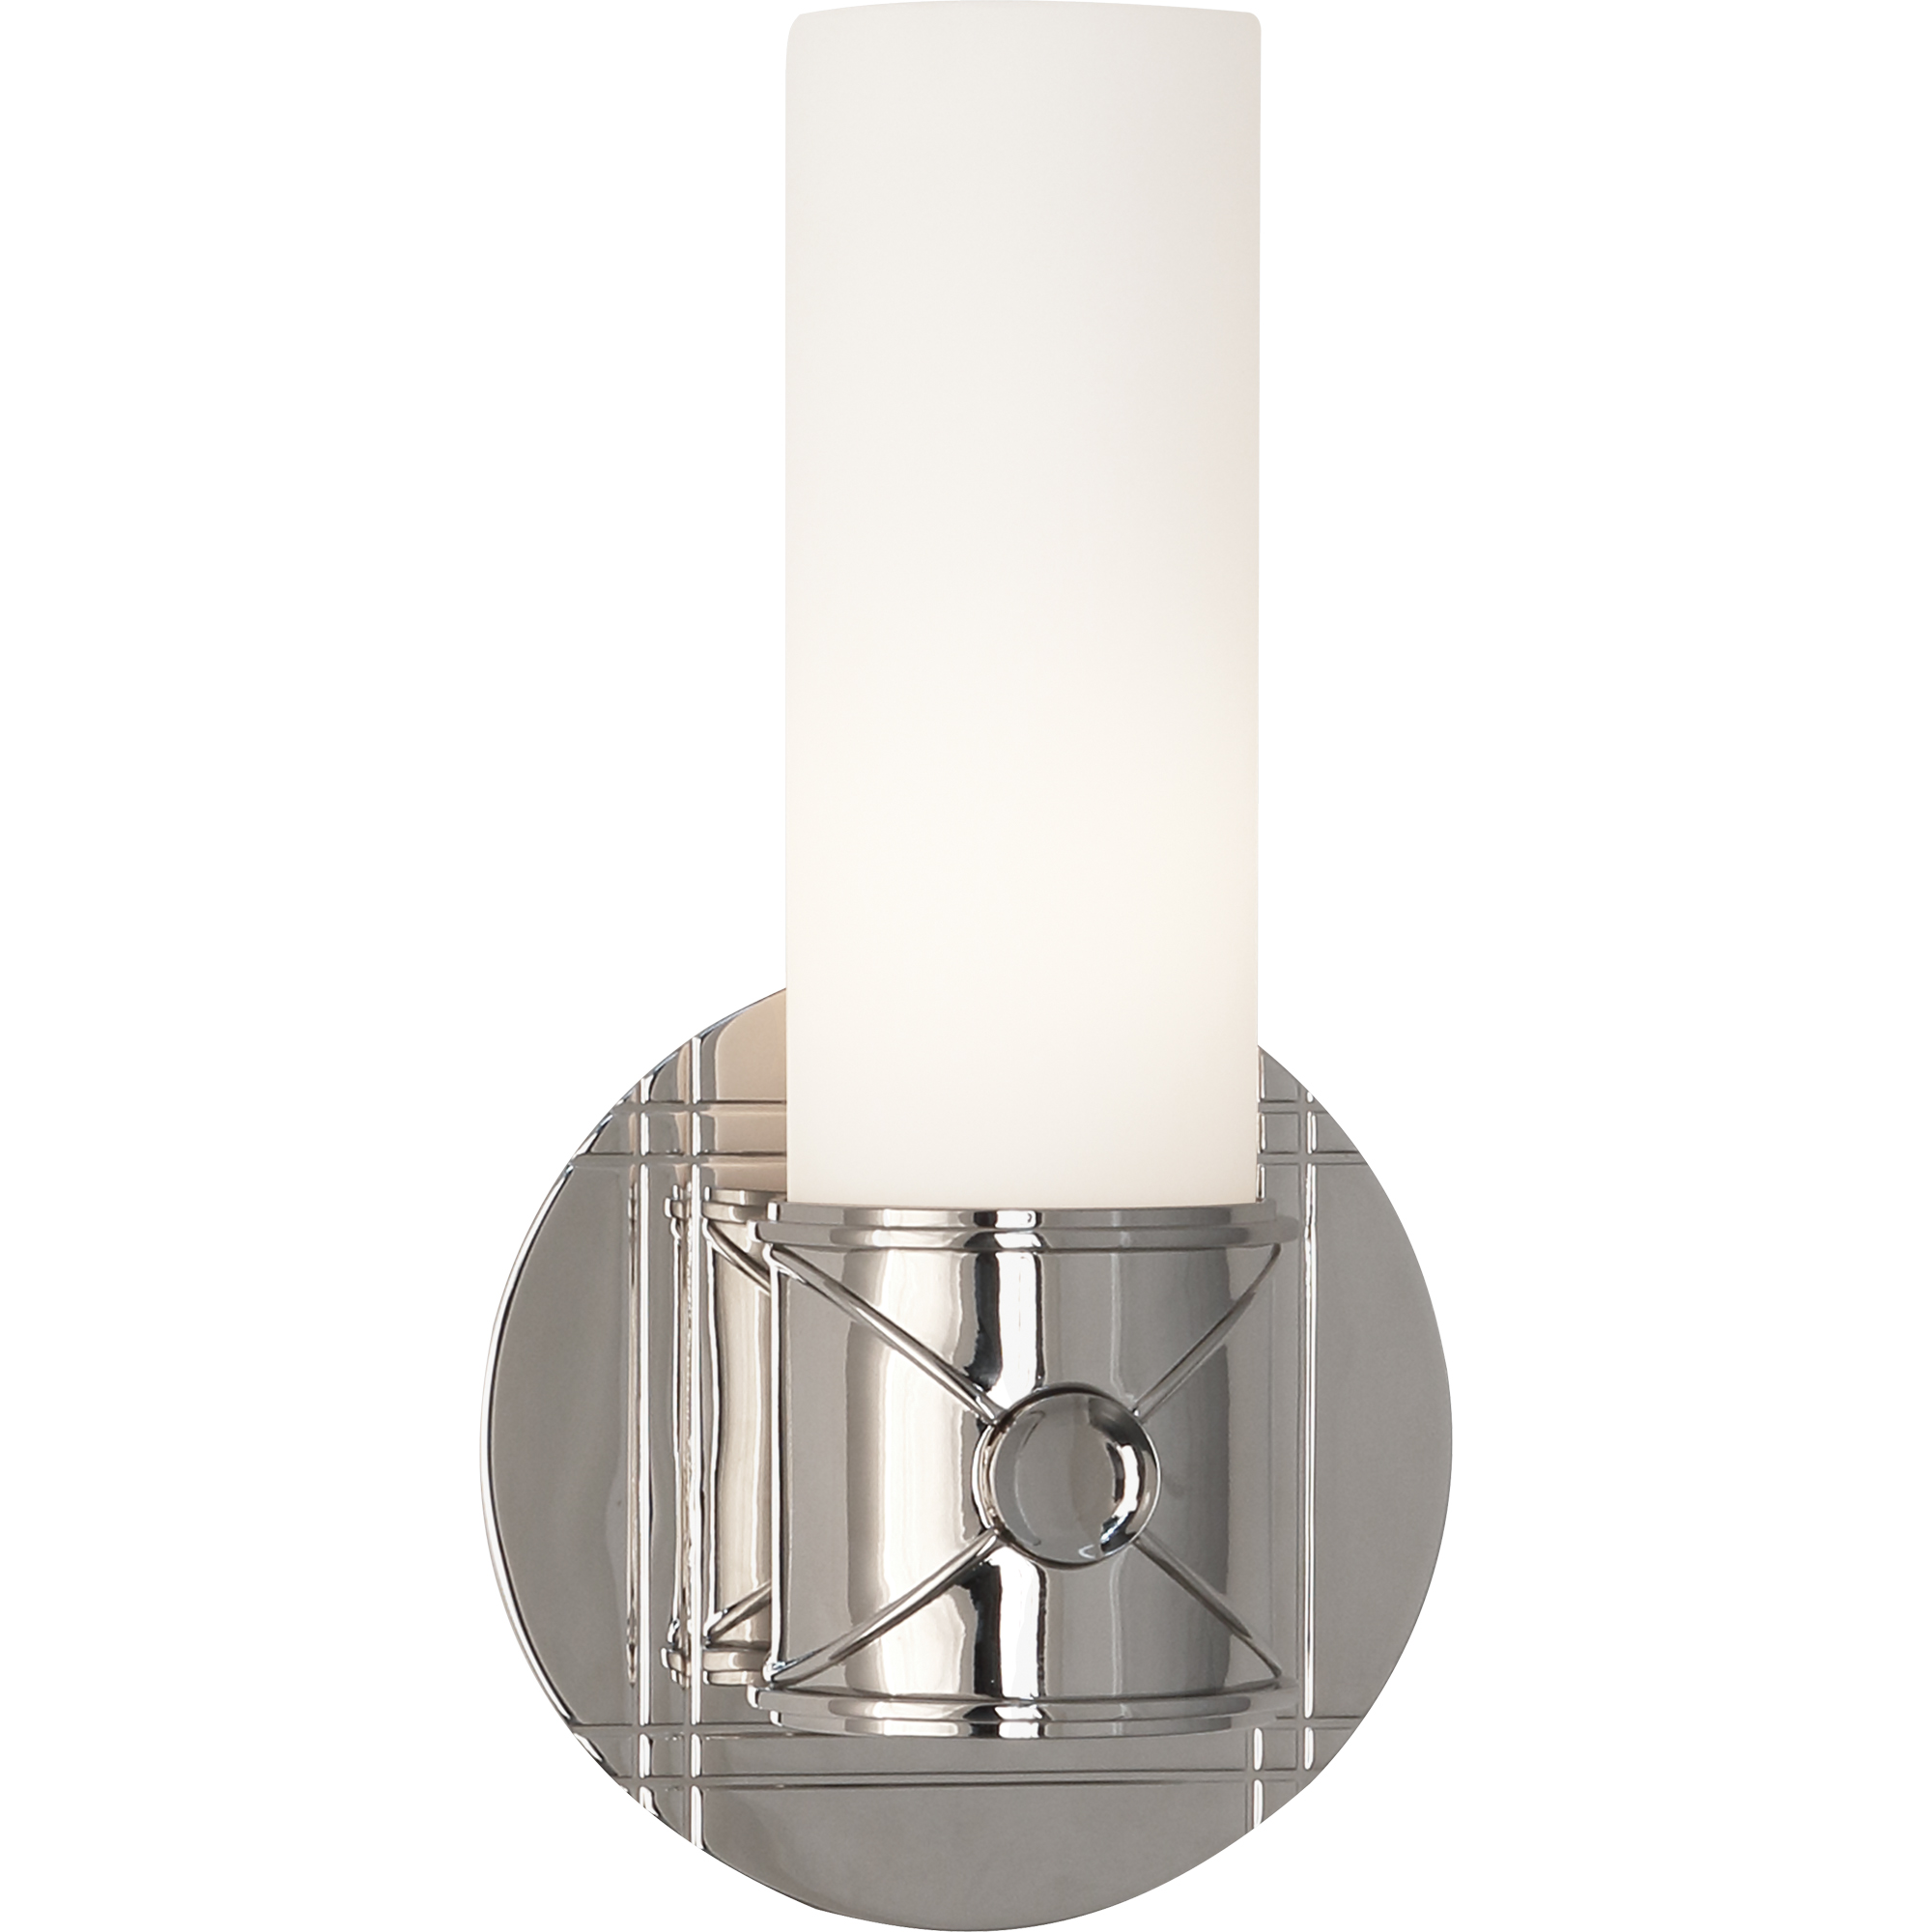 Jonathan Adler Maxime Wall Sconce Style #S632